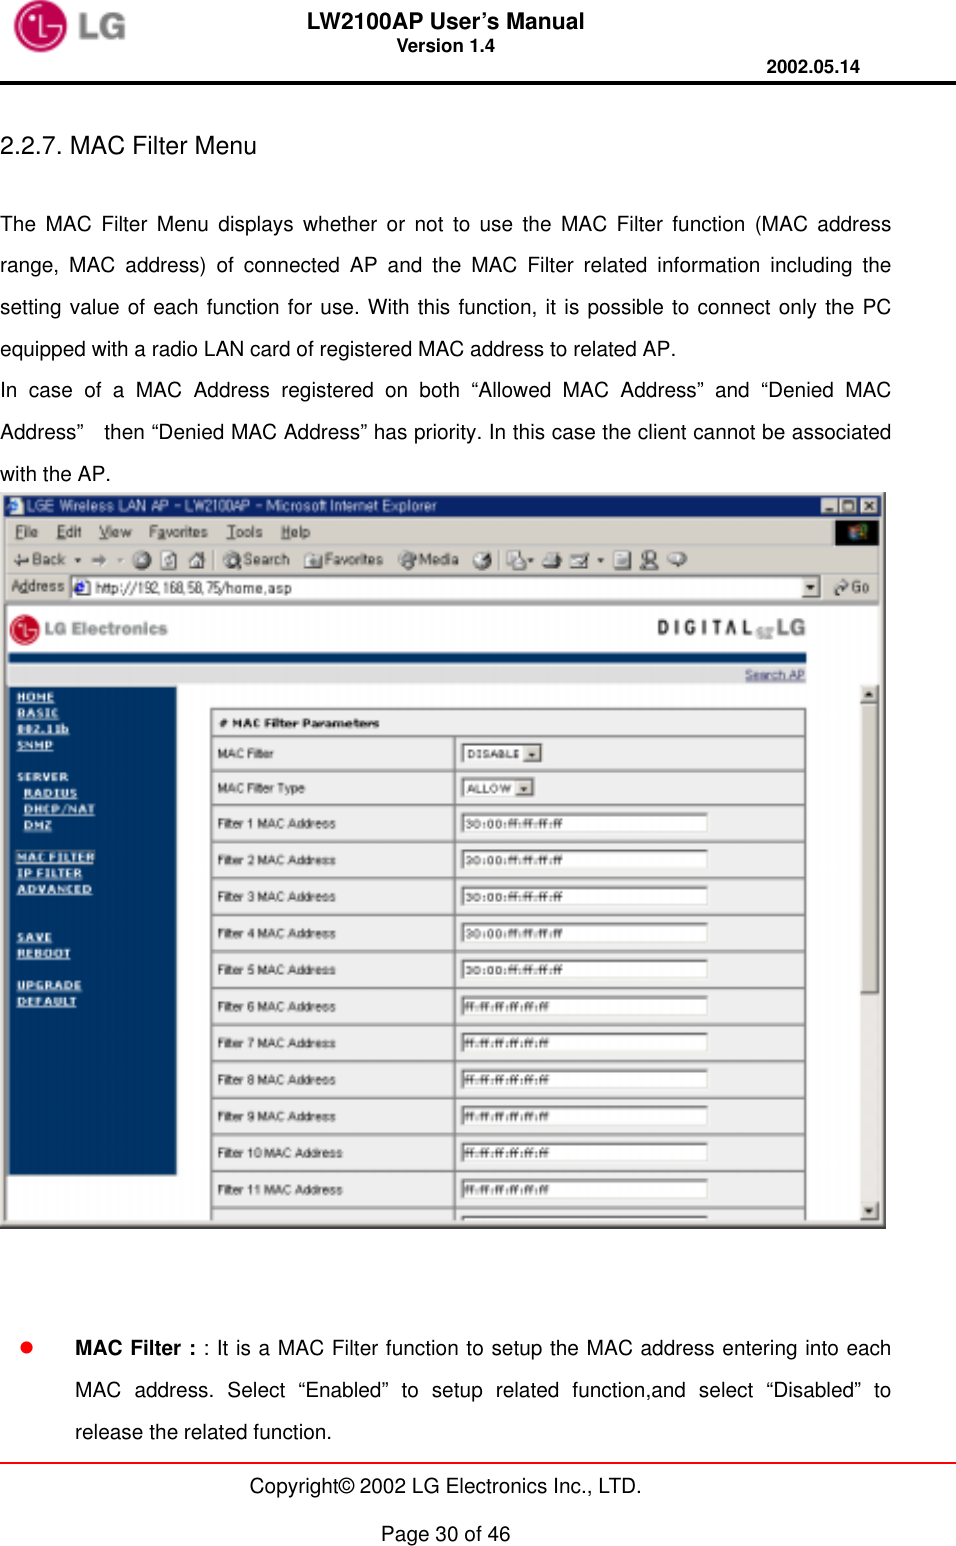 LW2100AP User’s Manual Version 1.4 2002.05.14   Copyright© 2002 LG Electronics Inc., LTD.  Page 30 of 46  2.2.7. MAC Filter Menu  The MAC Filter Menu displays whether or not to use the MAC Filter function (MAC address range, MAC address) of connected AP and the MAC Filter related information including the setting value of each function for use. With this function, it is possible to connect only the PC equipped with a radio LAN card of registered MAC address to related AP. In case of a MAC Address registered on both “Allowed MAC Address” and “Denied MAC Address”    then “Denied MAC Address” has priority. In this case the client cannot be associated with the AP.      MAC Filter : : It is a MAC Filter function to setup the MAC address entering into each MAC address. Select “Enabled” to setup related function,and select “Disabled” to release the related function. 